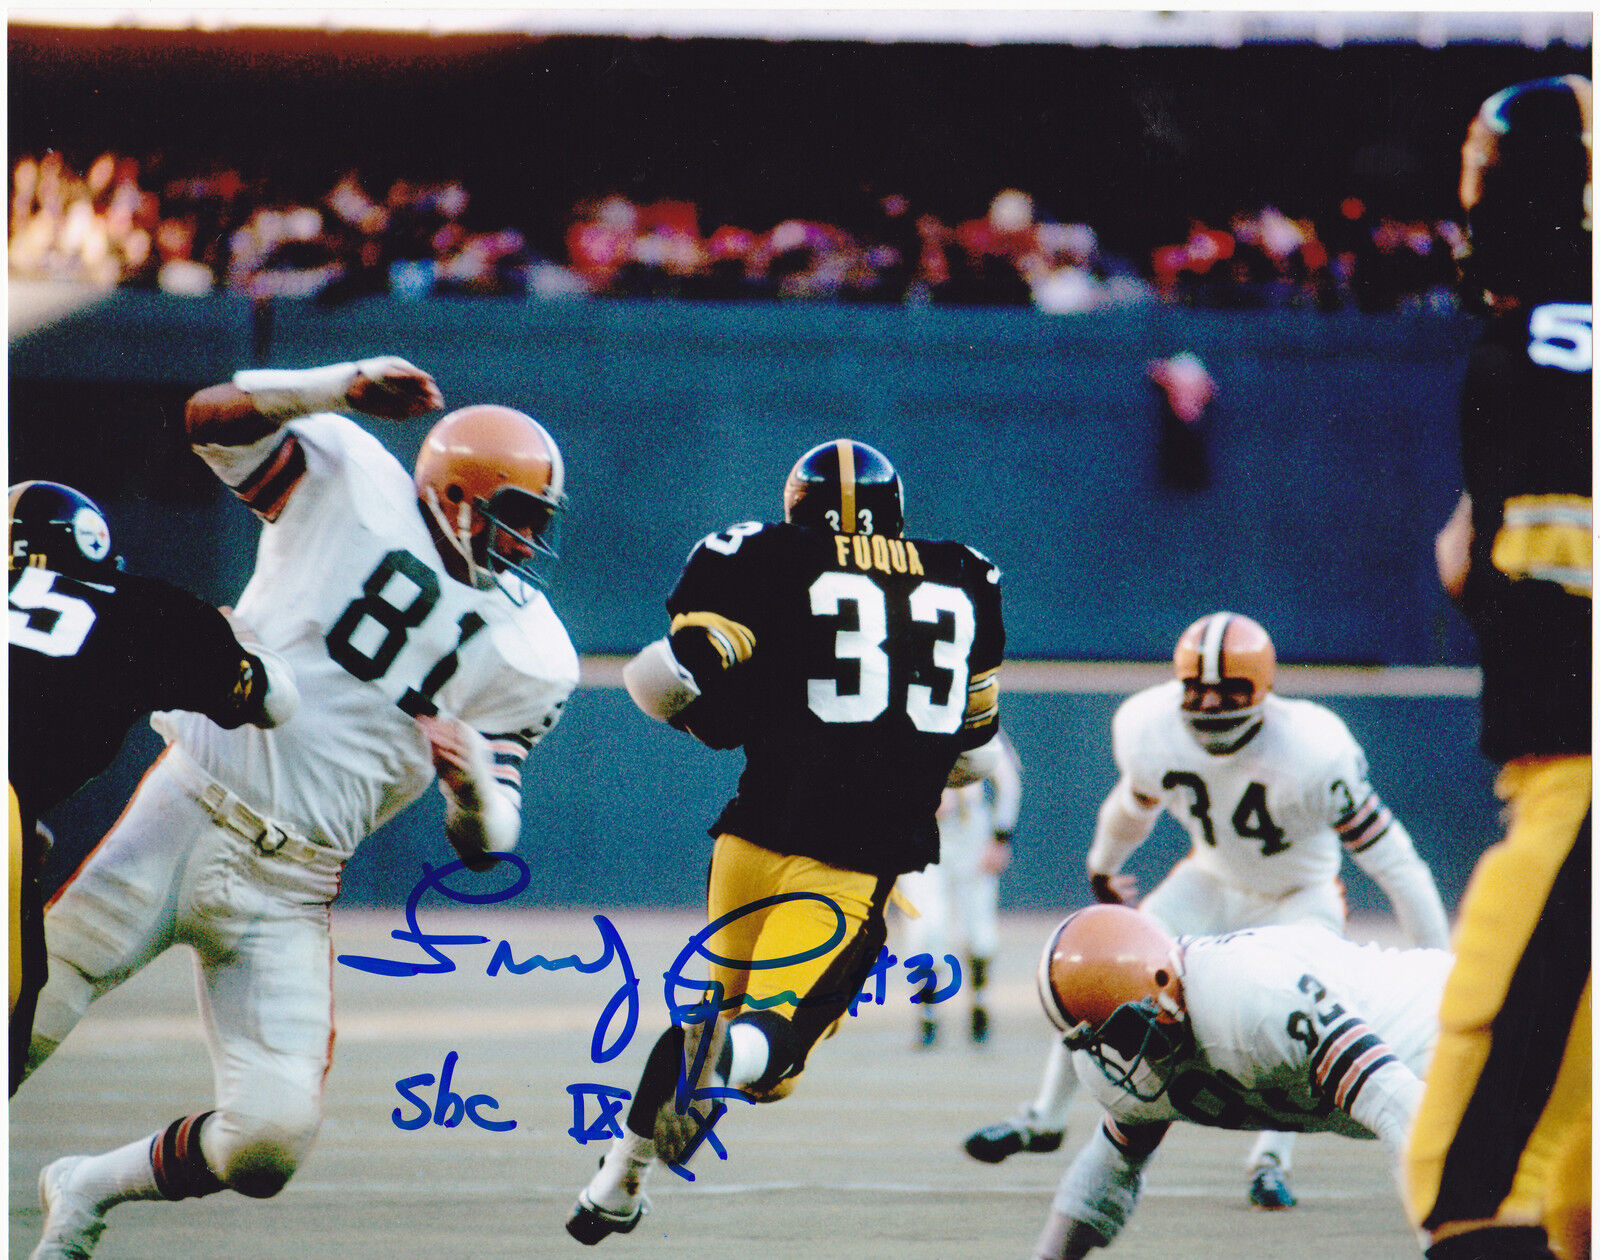 FRENCHY FUQUA PITTSBURGH STEELERS SUPER BOWL CHAMPS IX, X ACTION SIGNED 8x10